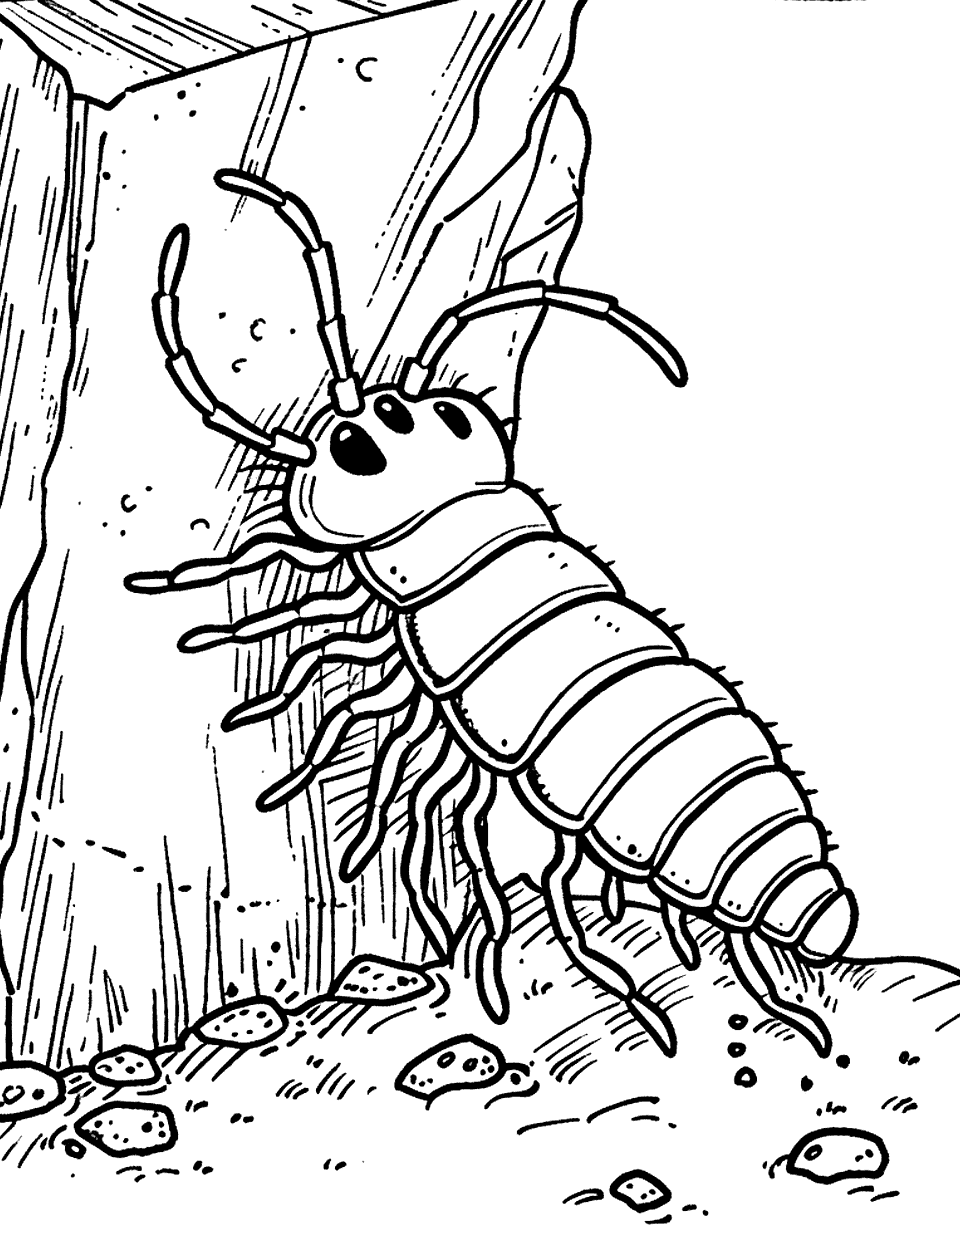 Centipede crawling on a Rock Insect Coloring Page - A centipede crawling to get on top of a rock.